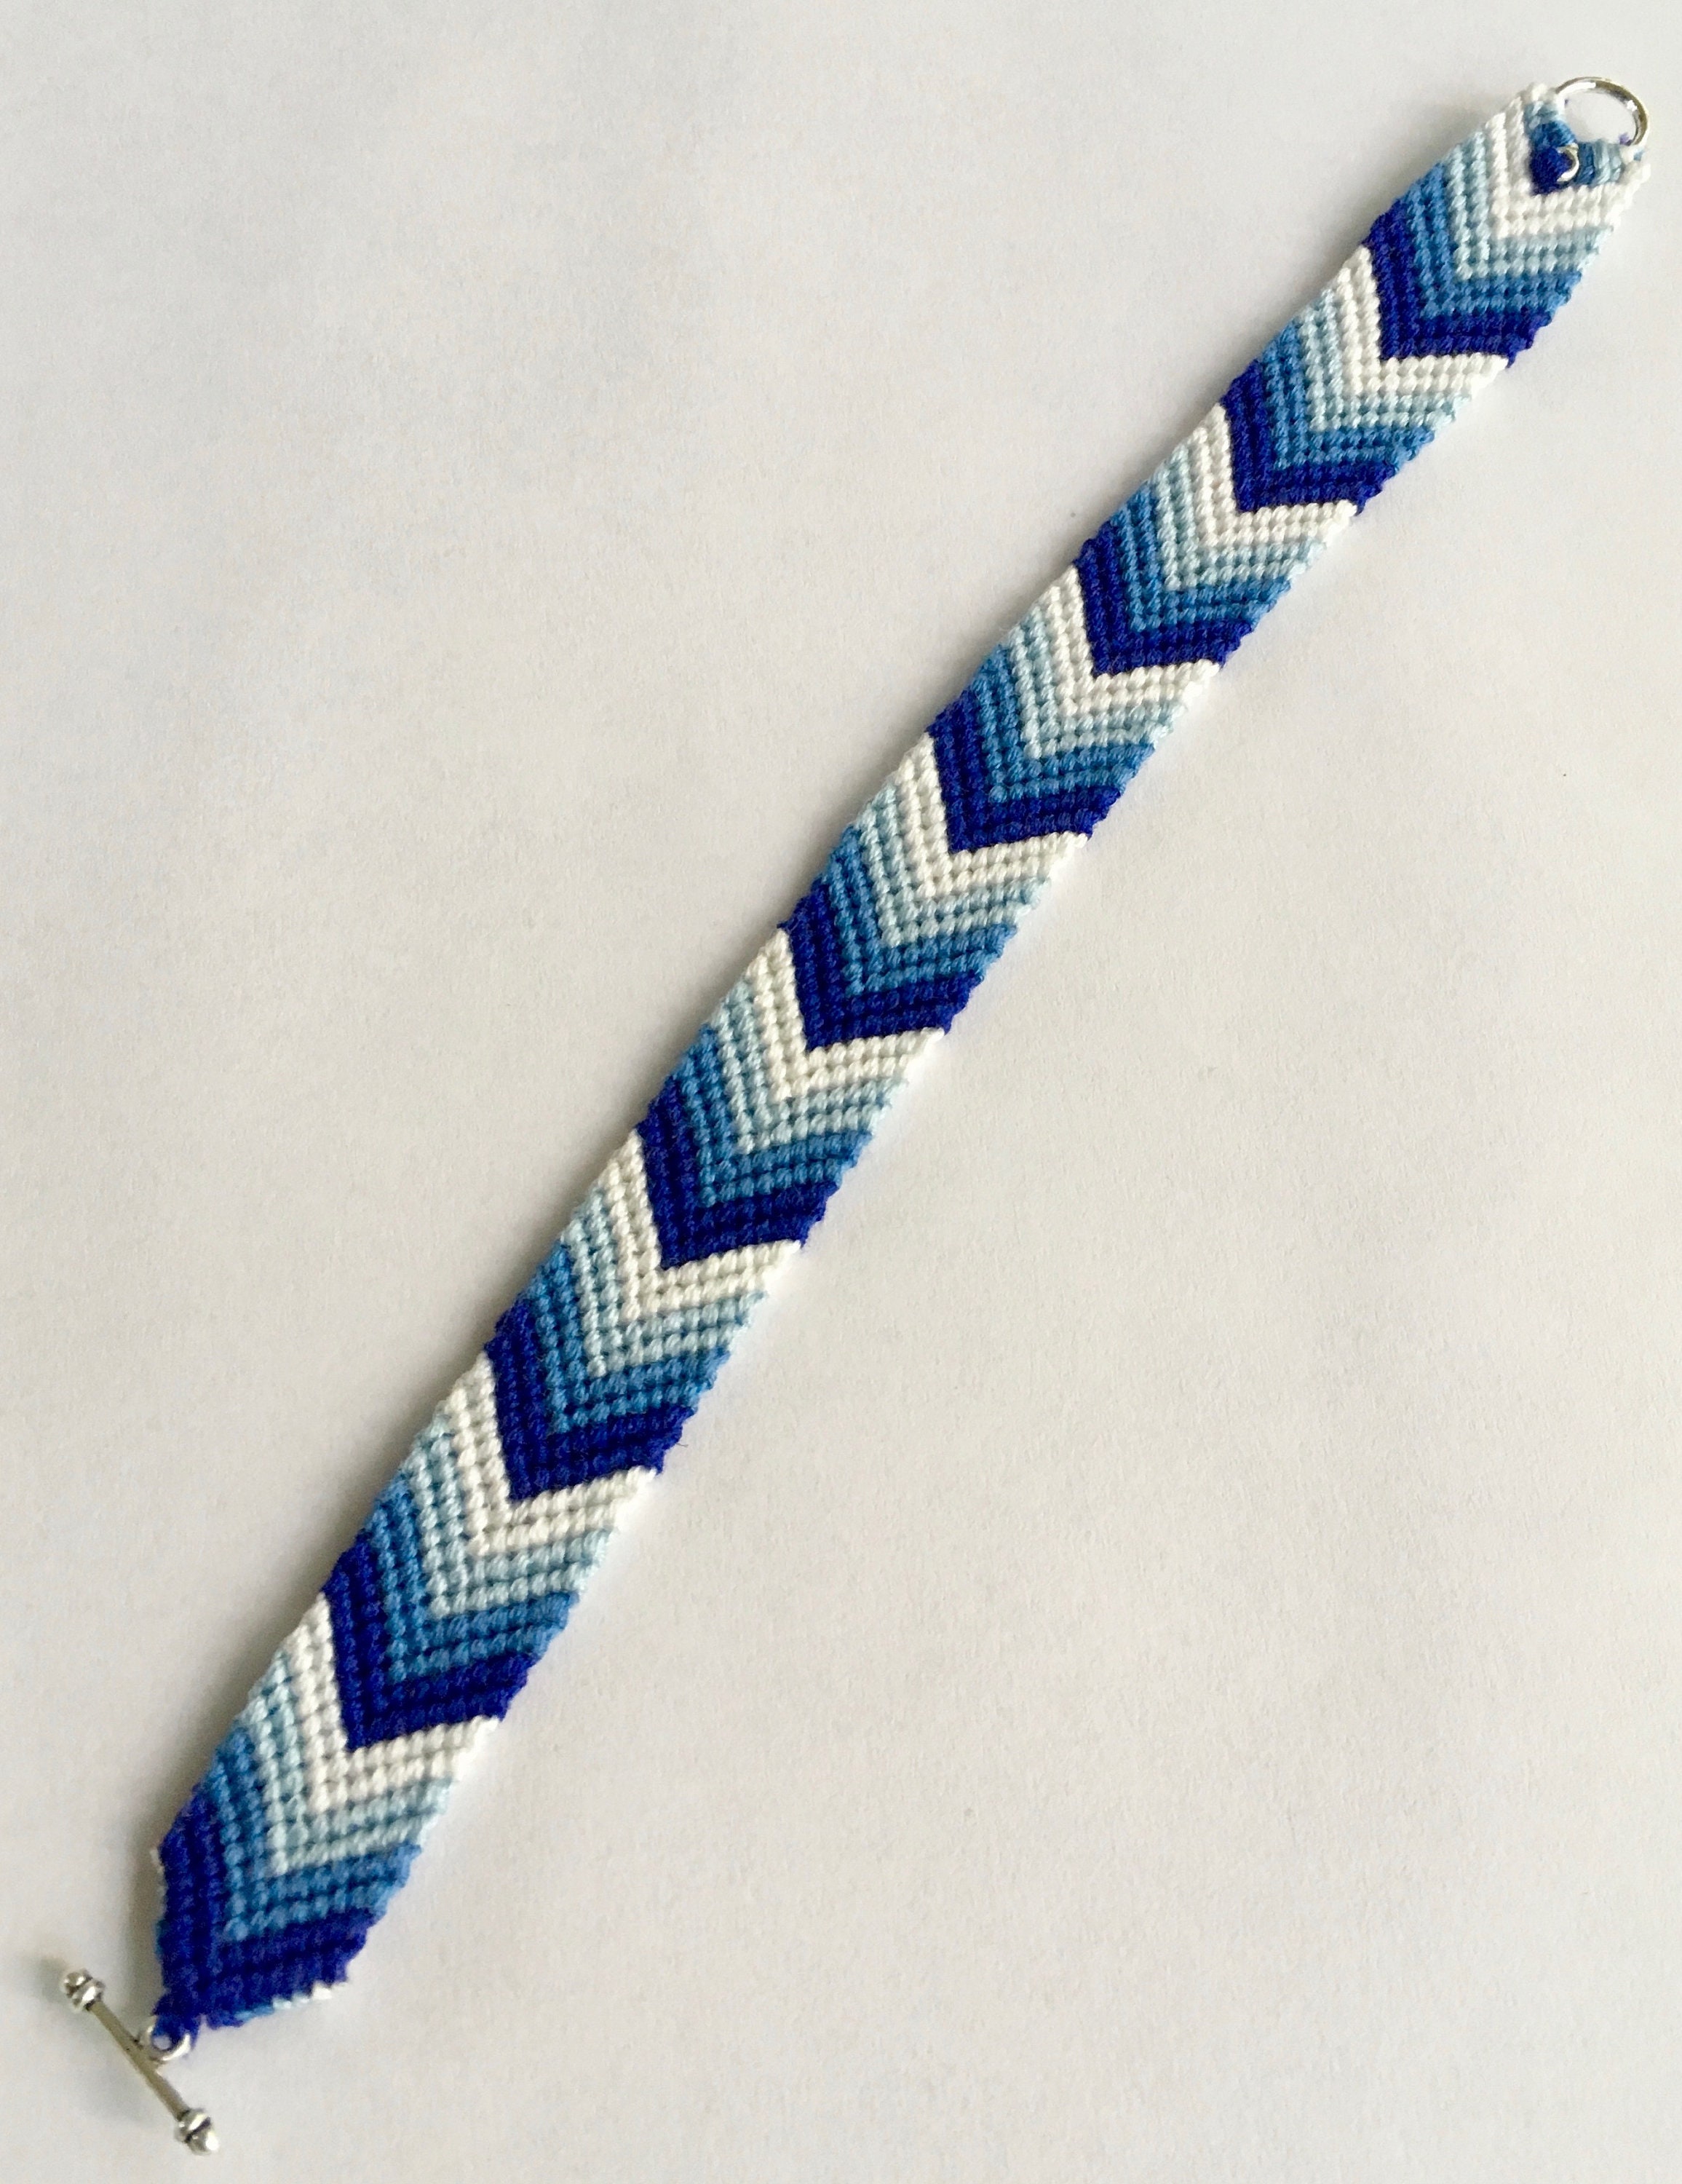 Searching for braided friendship bracelet patterns? Maybe this blue nylon  thread brac…